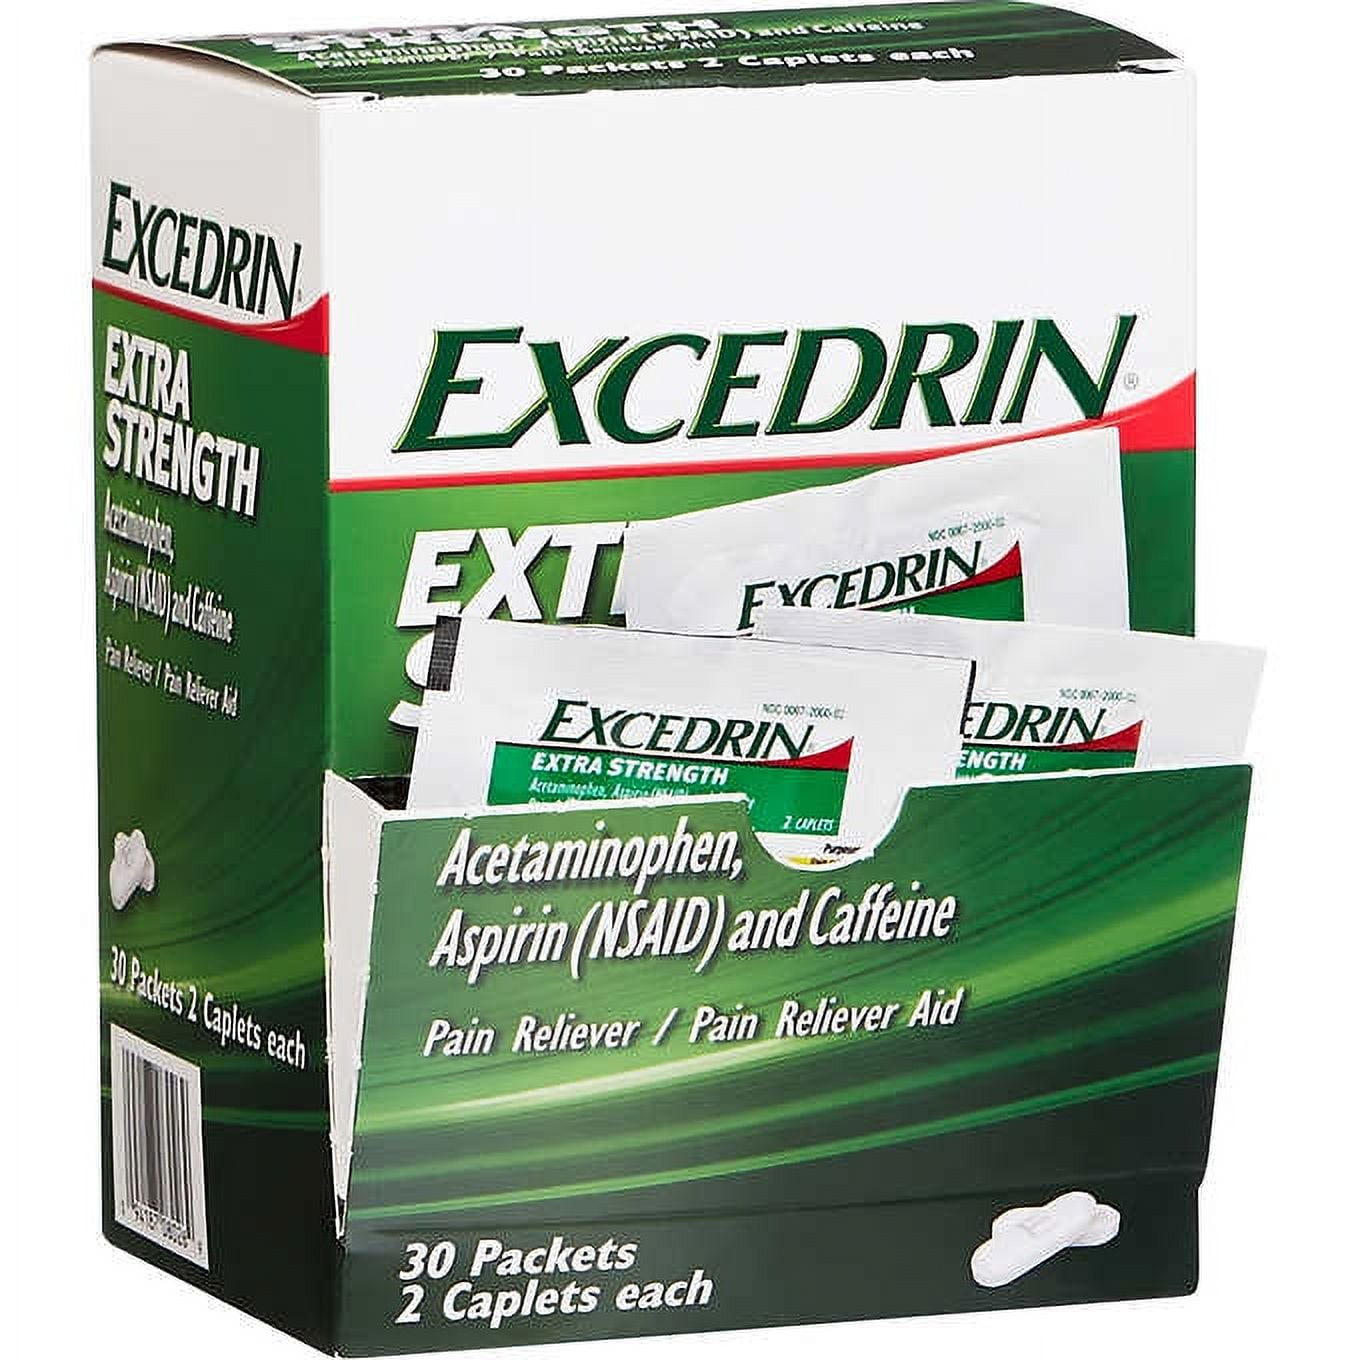 All Travel Sizes: Wholesale Travel Size Excedrin Extra Strength - Card of  4: Carded Medications